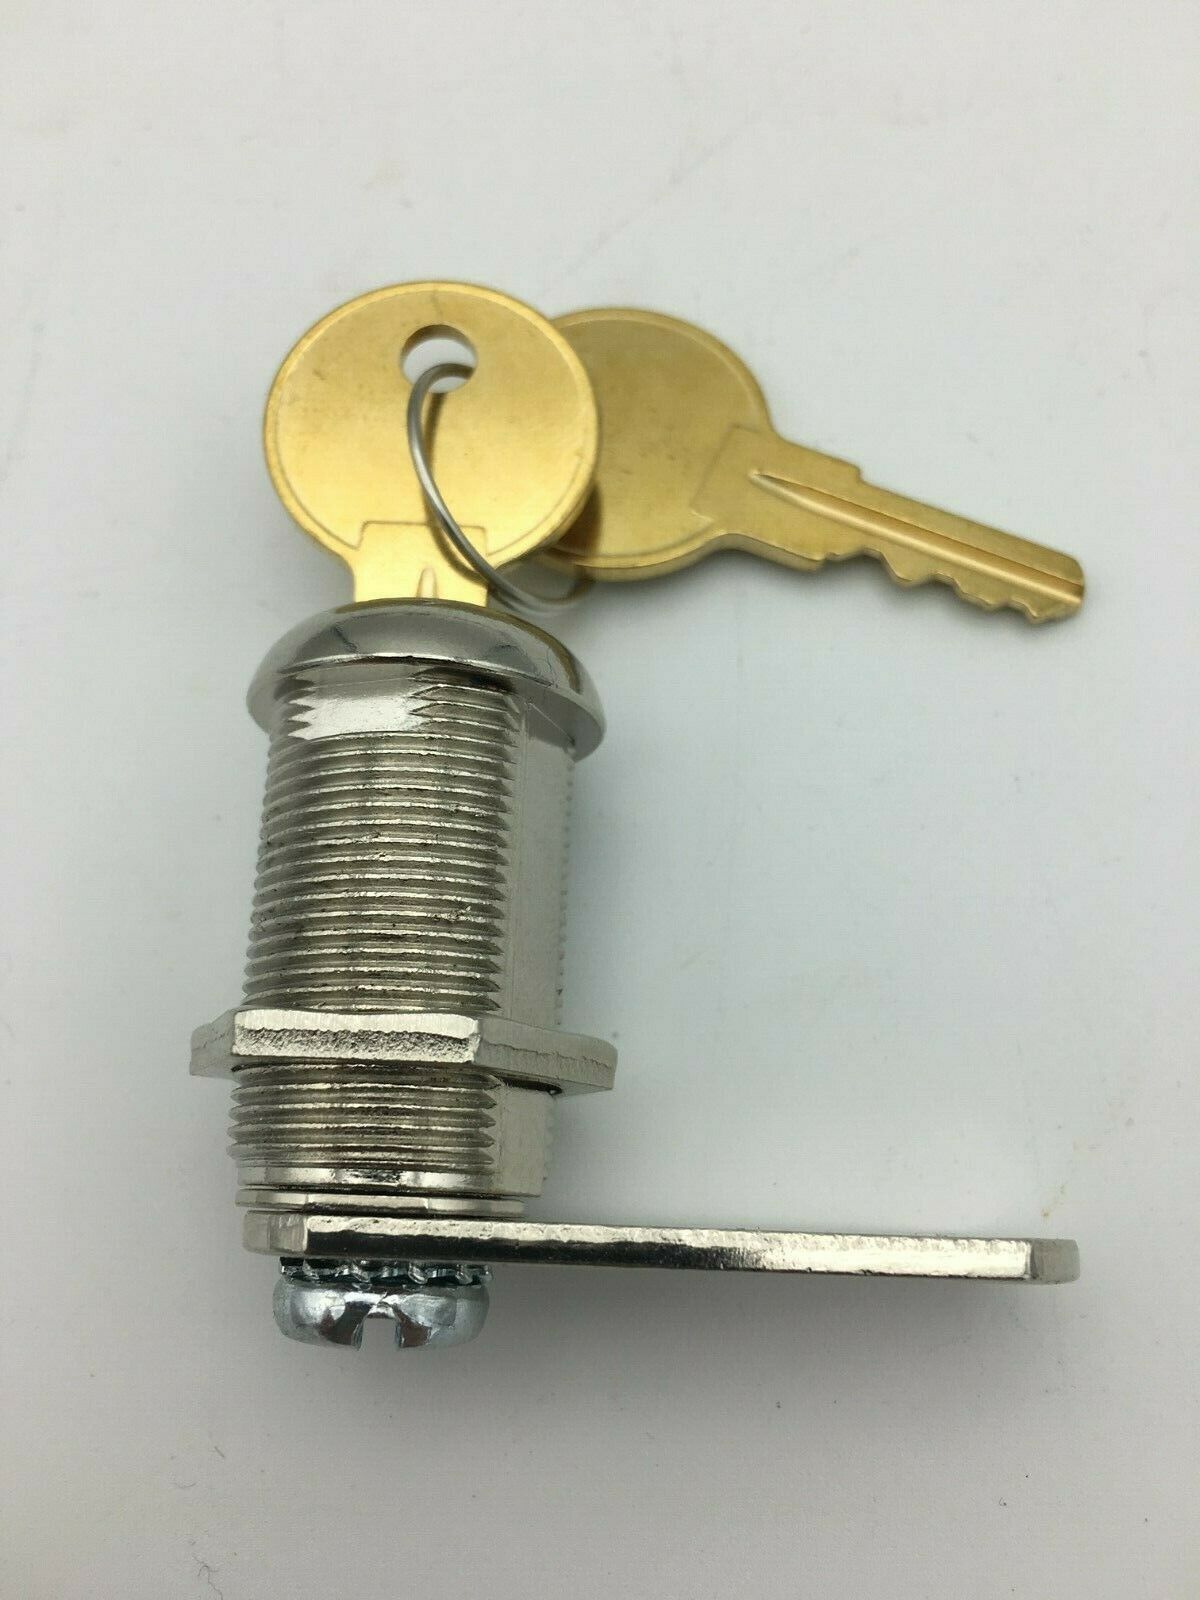 New Replacement Lock Set For Dynamo Valley Pool Table Billiards